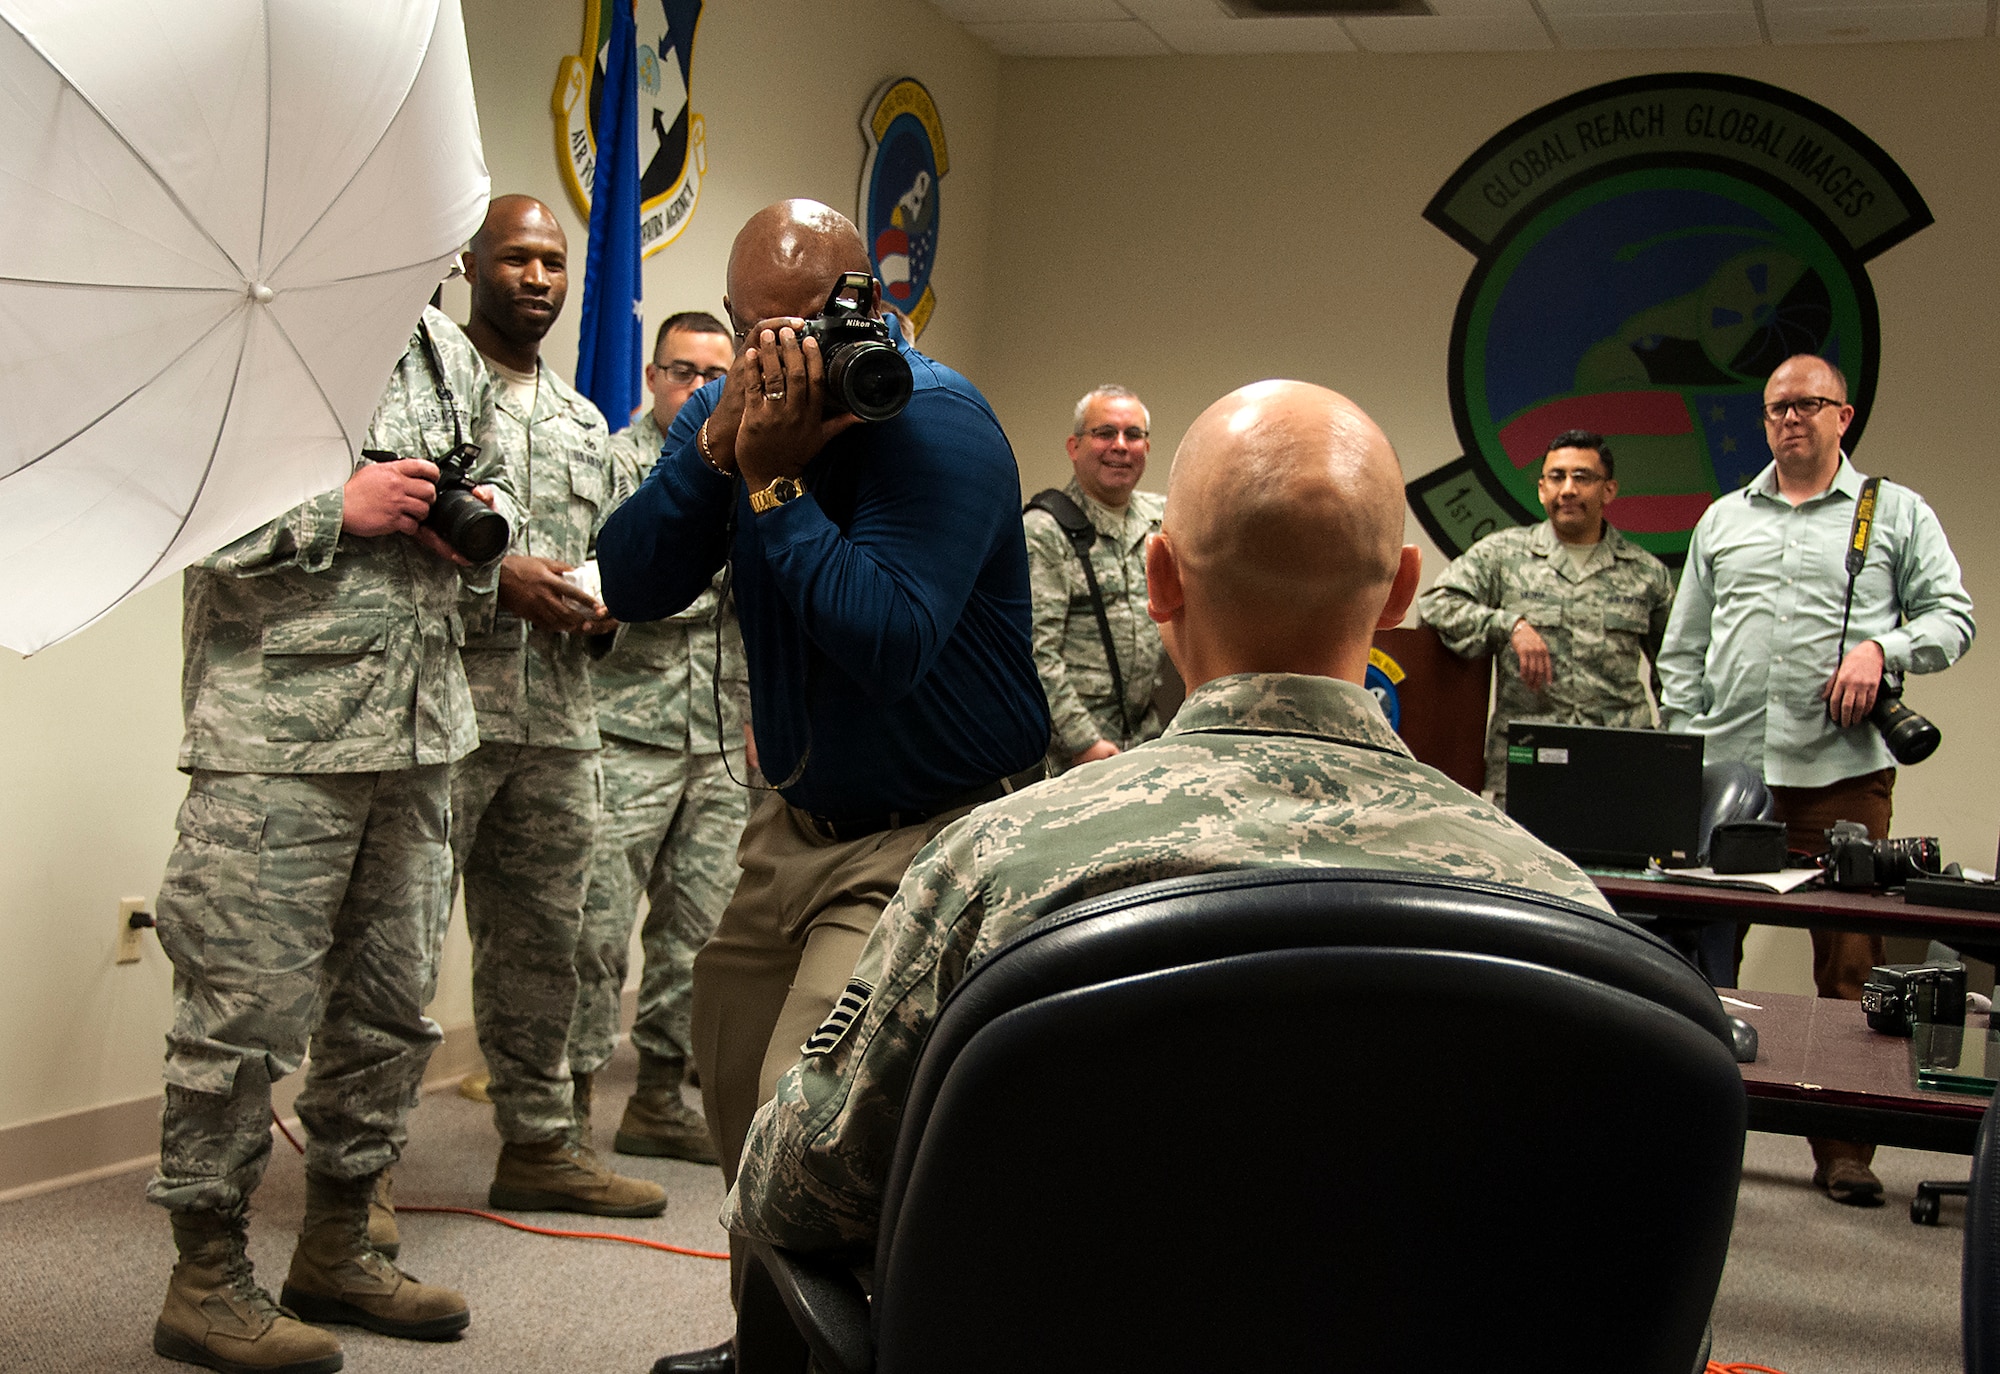 Clarence Brown,1st CCS’s chief of Still Photo Standardization, demonstrates proper photo technique to Reserve public affairs specialist during a 3 days crash course photo training session coordinated by  315th Airlift Wing Public Affairs this week. About 23 Air Force Reserve public affairs specialists from bases across the country showed up at Joint Base Charleston with an eagerness to improve their photo skills under the tutelage of some of the Air Force’s most elite photographers – 1st Combat Camera Squadron. (U.S. Air Force Reserve photo by Michael Dukes)